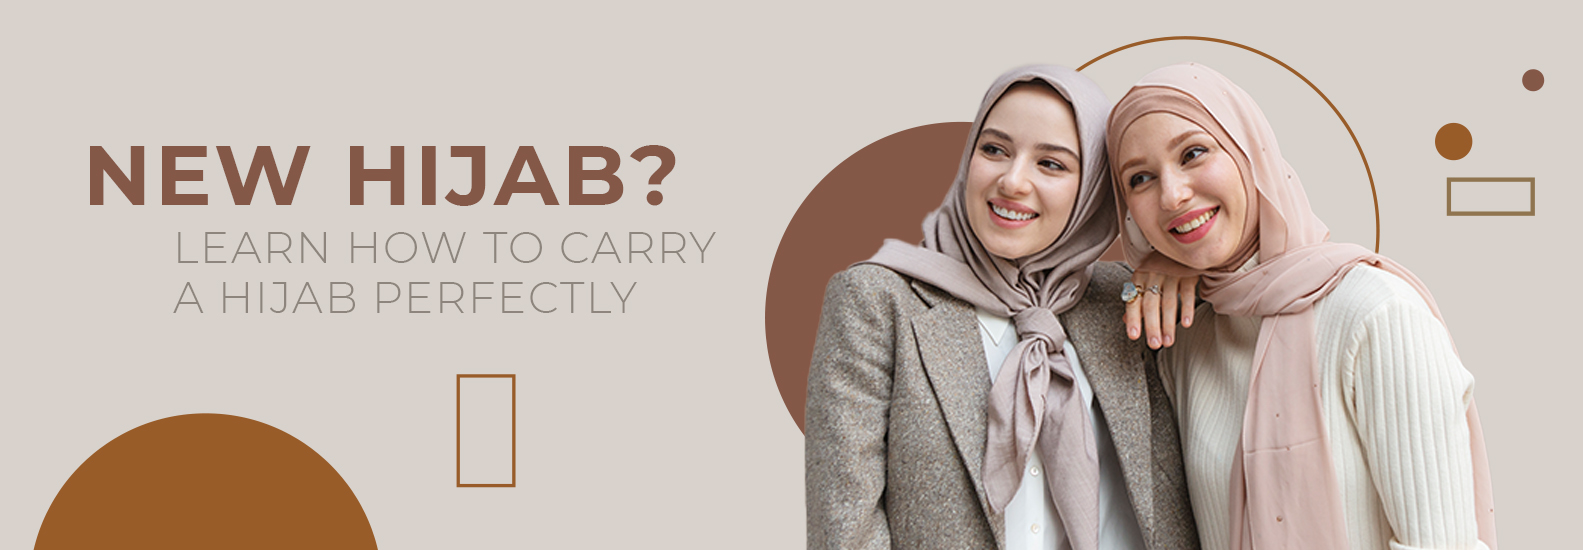 New Hijabi? Learn How to Carry a Hijab Perfectly